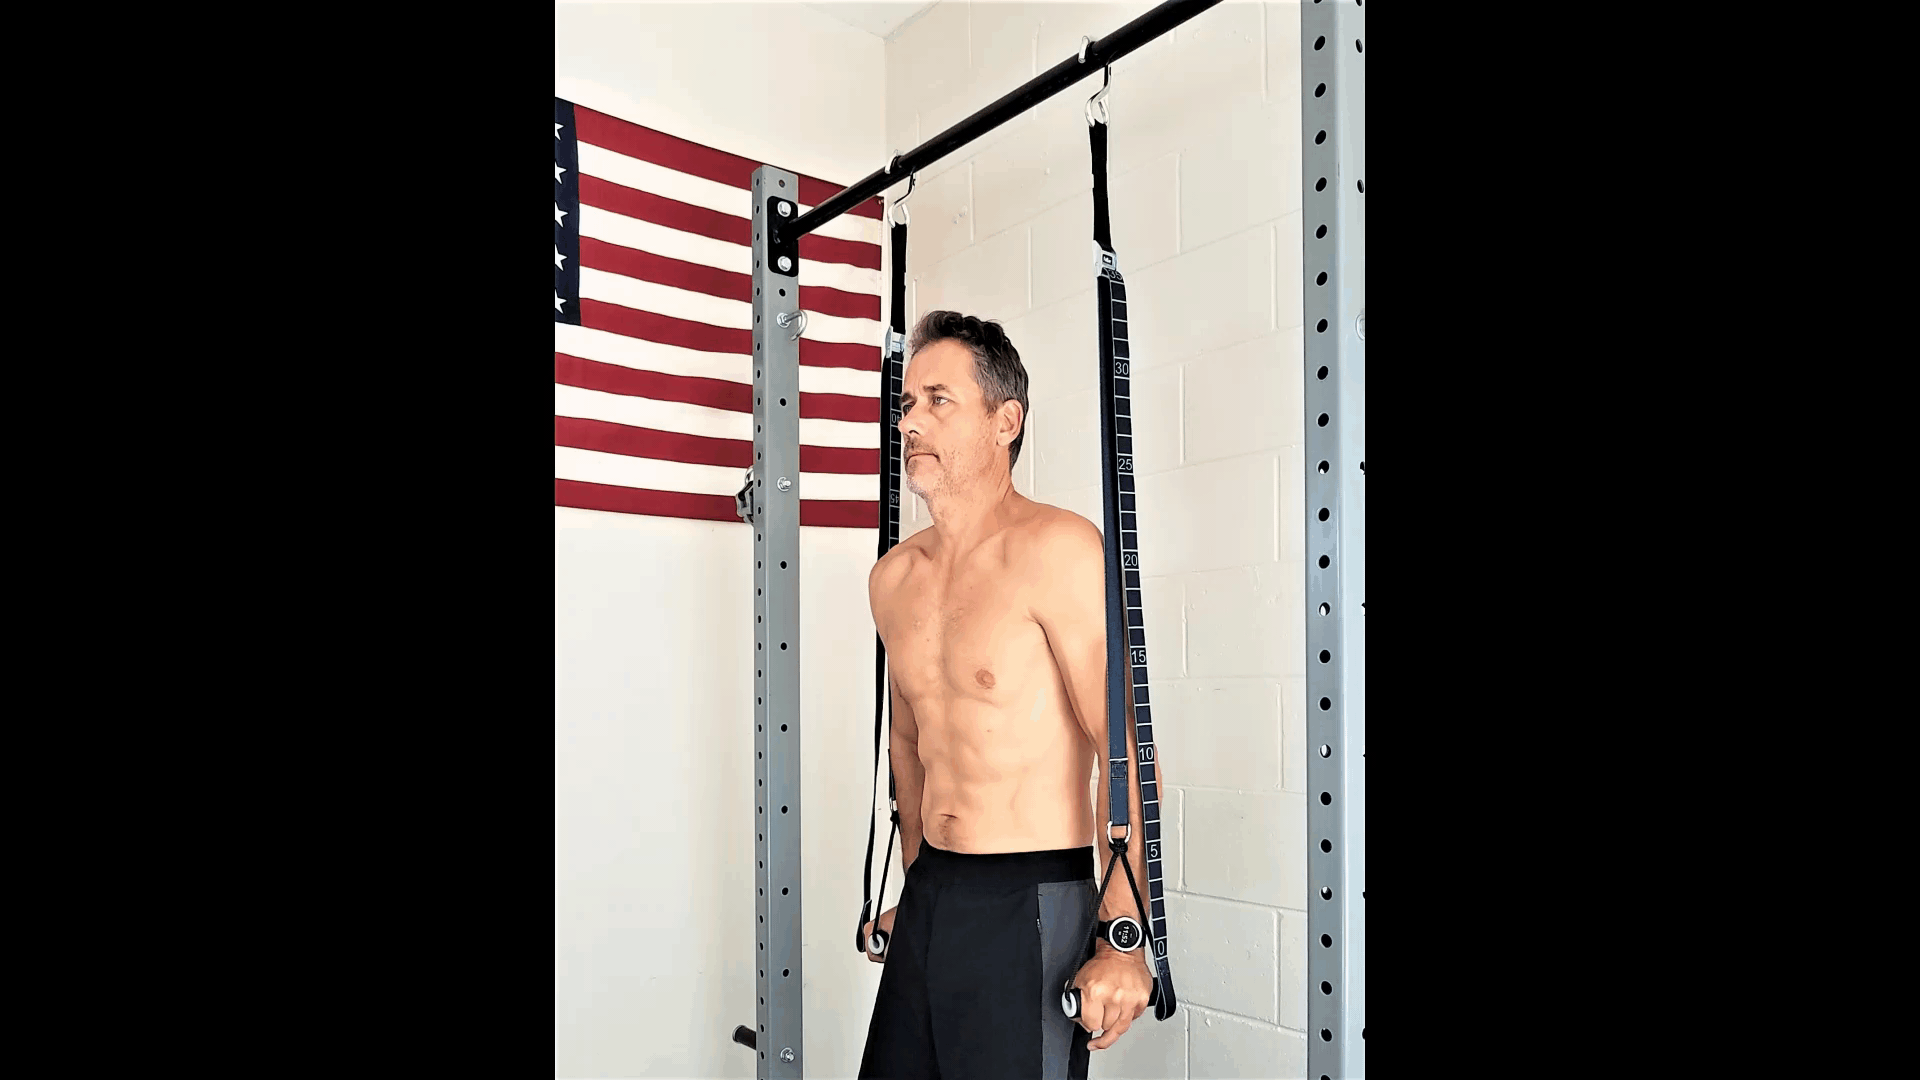 Suspension Straps - FitBar Grip, Obstacle, Strength Equipment